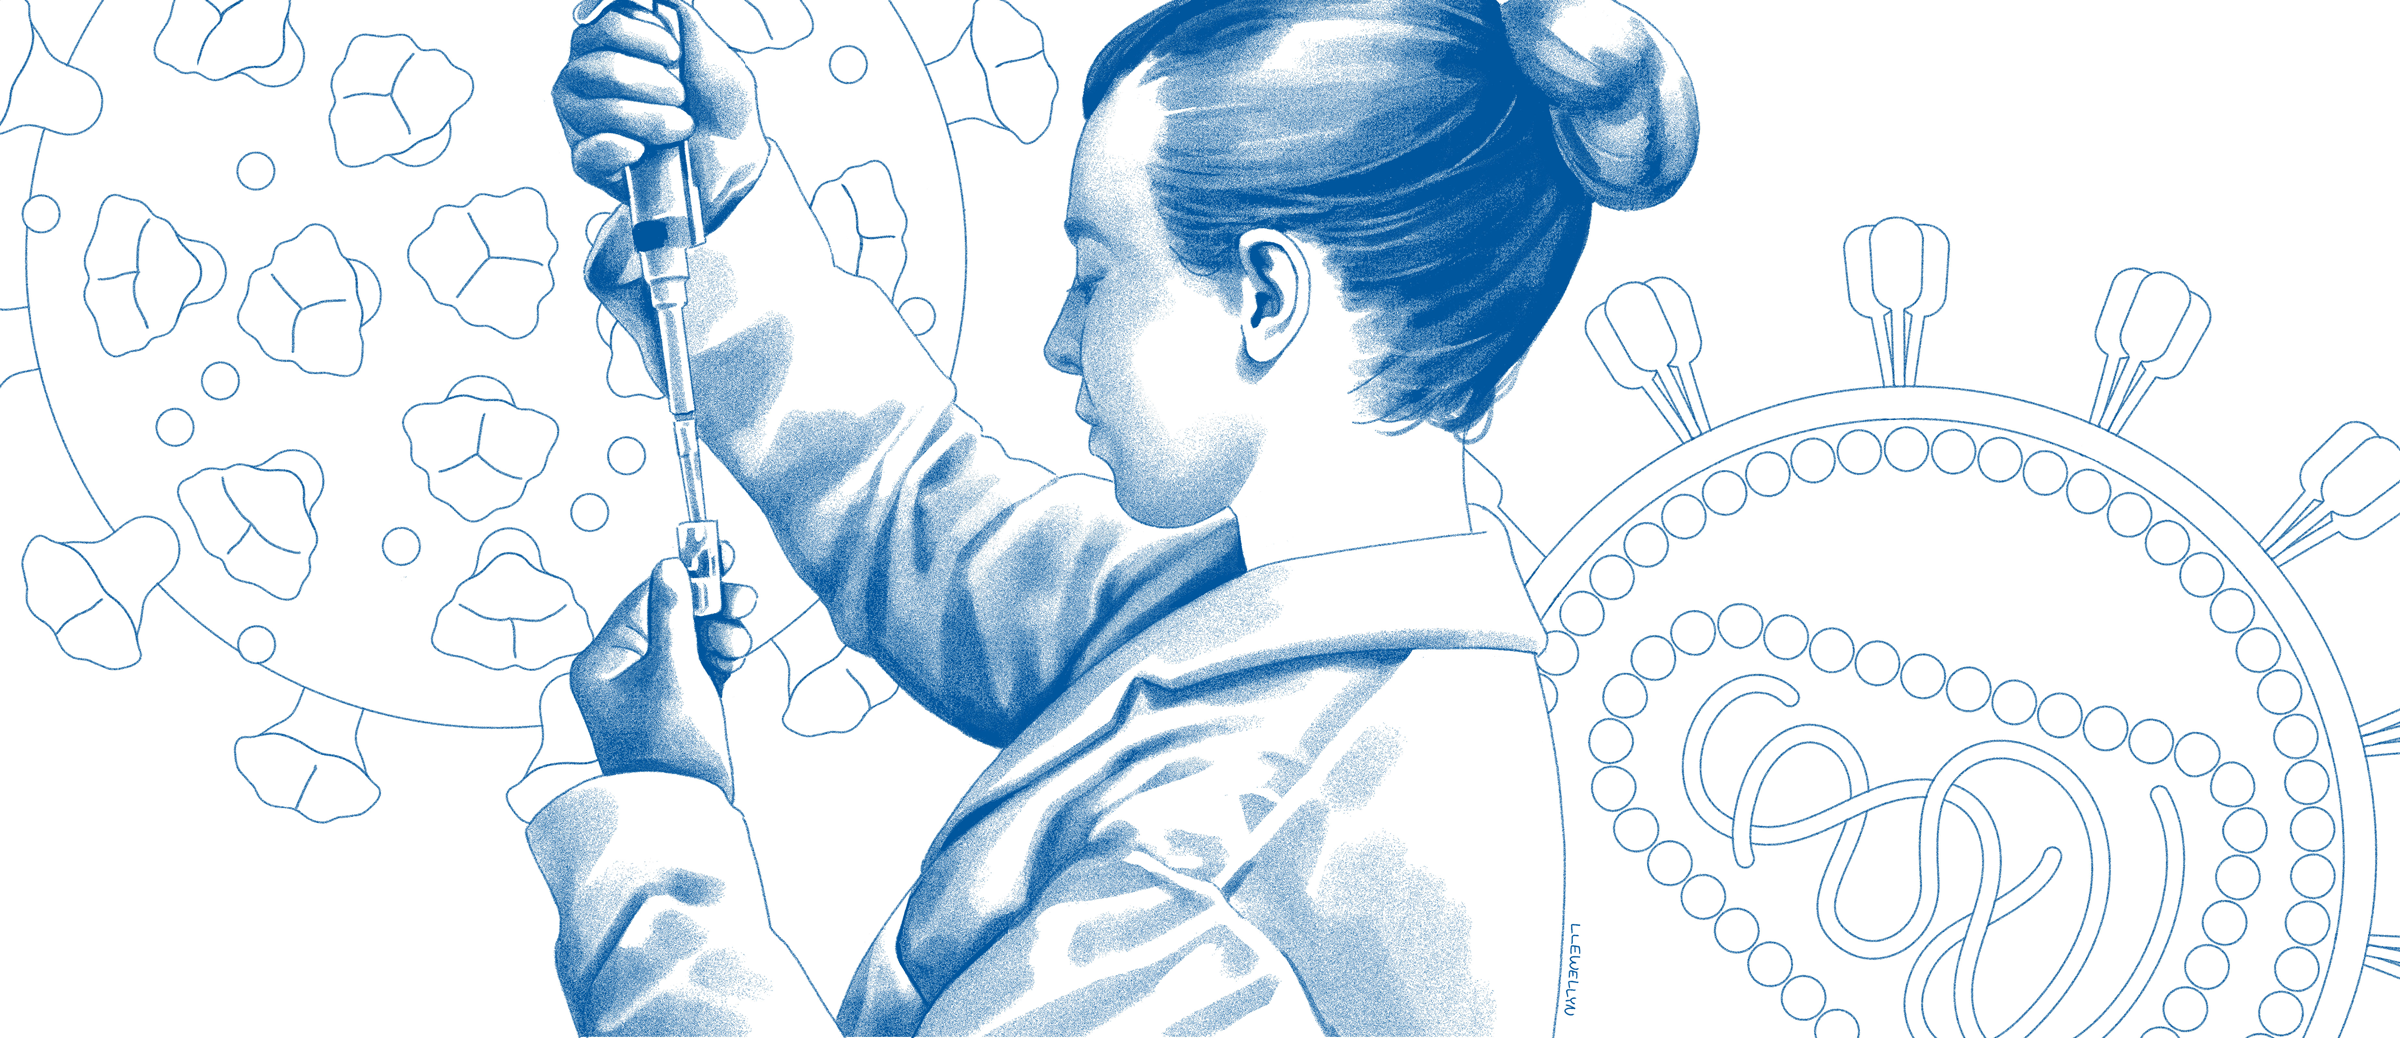 Illustration of researcher working with viruses